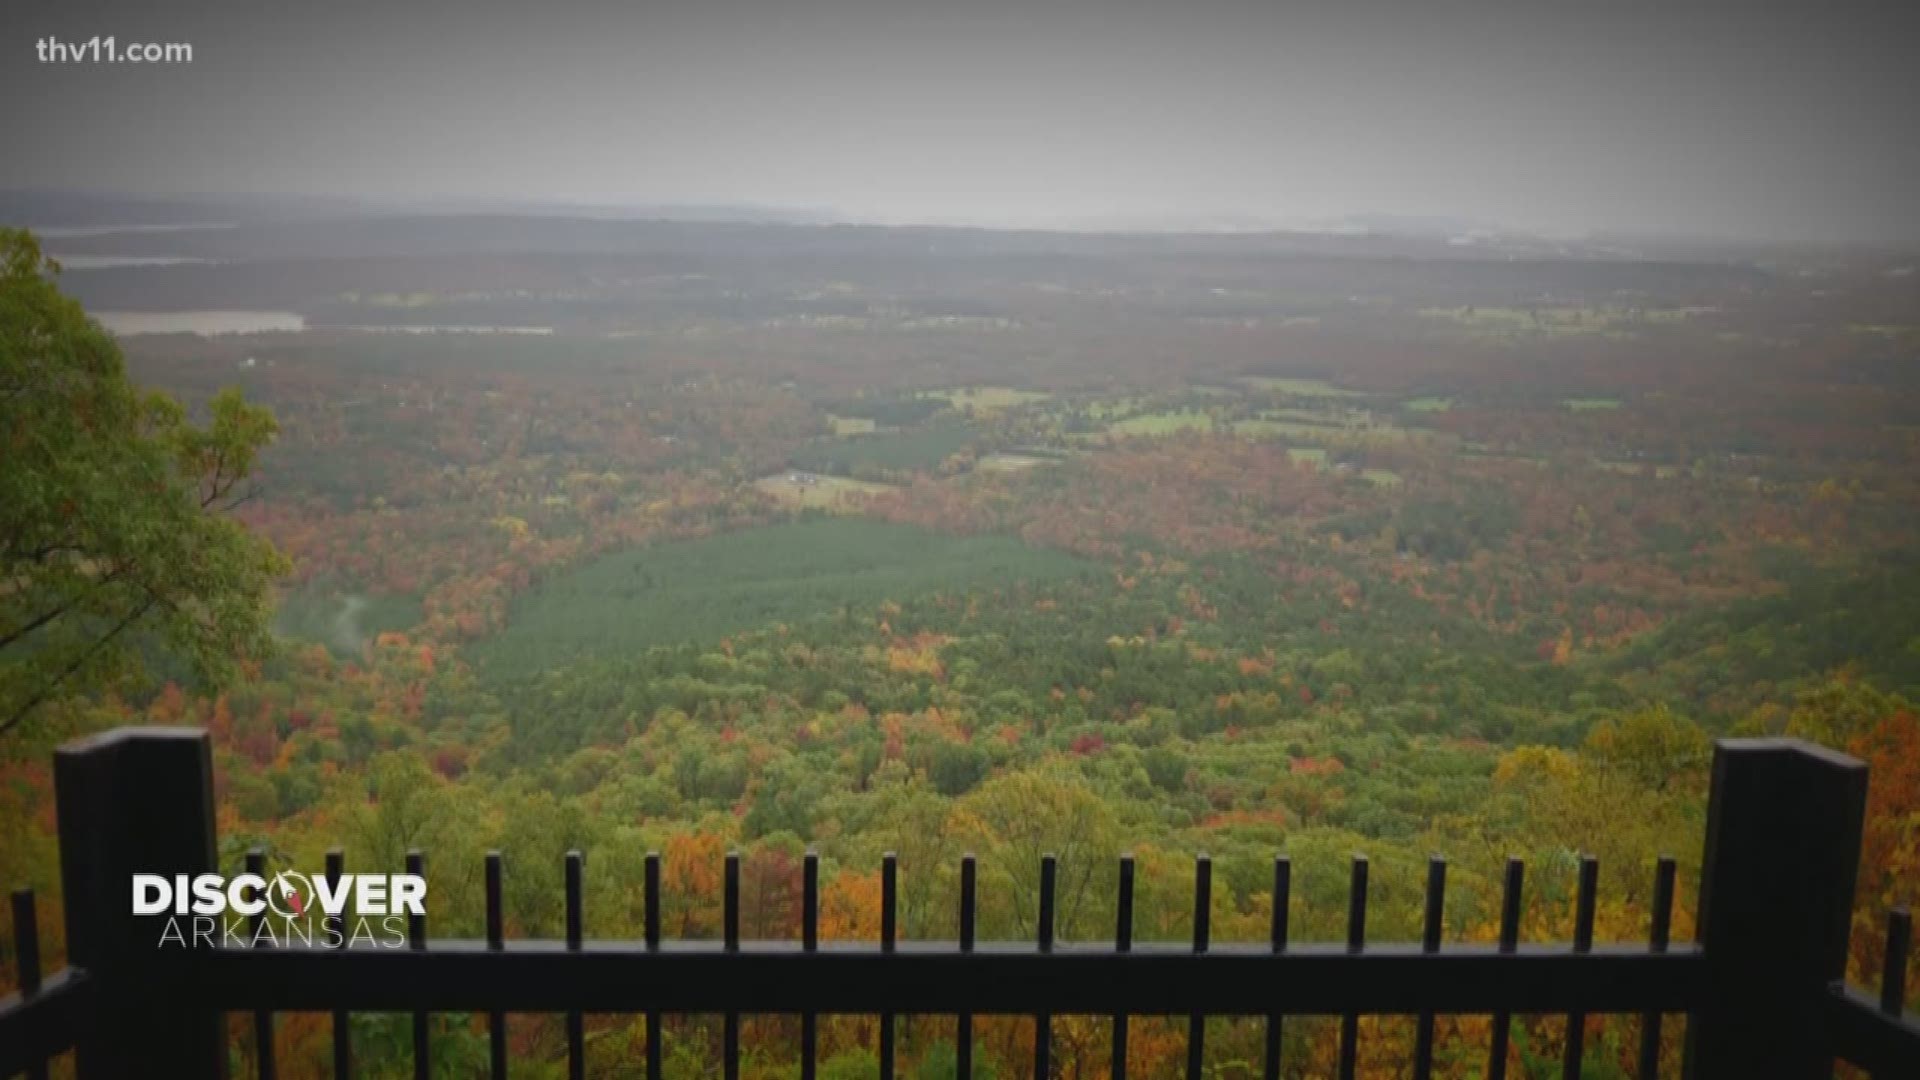 THV11 This Morning meteorologist Mariel Ruiz and Adam Bledsoe took us on a Discover Arkansas trip to Mount Nebo to take in the beautiful fall scenery.